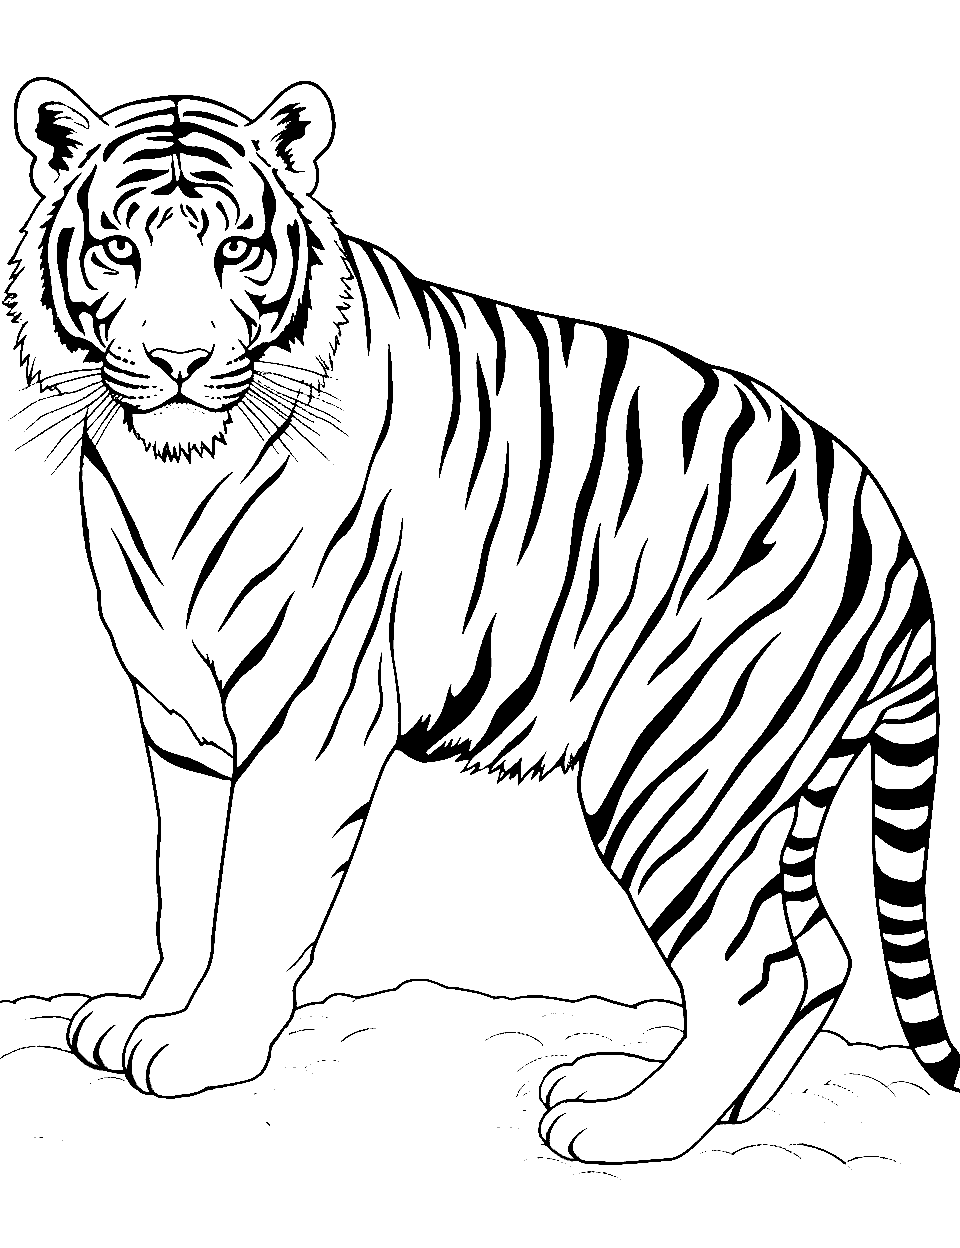 Simple Tiger Outline Coloring Page - A basic and clear outline of a tiger, perfect for young kids to color in.